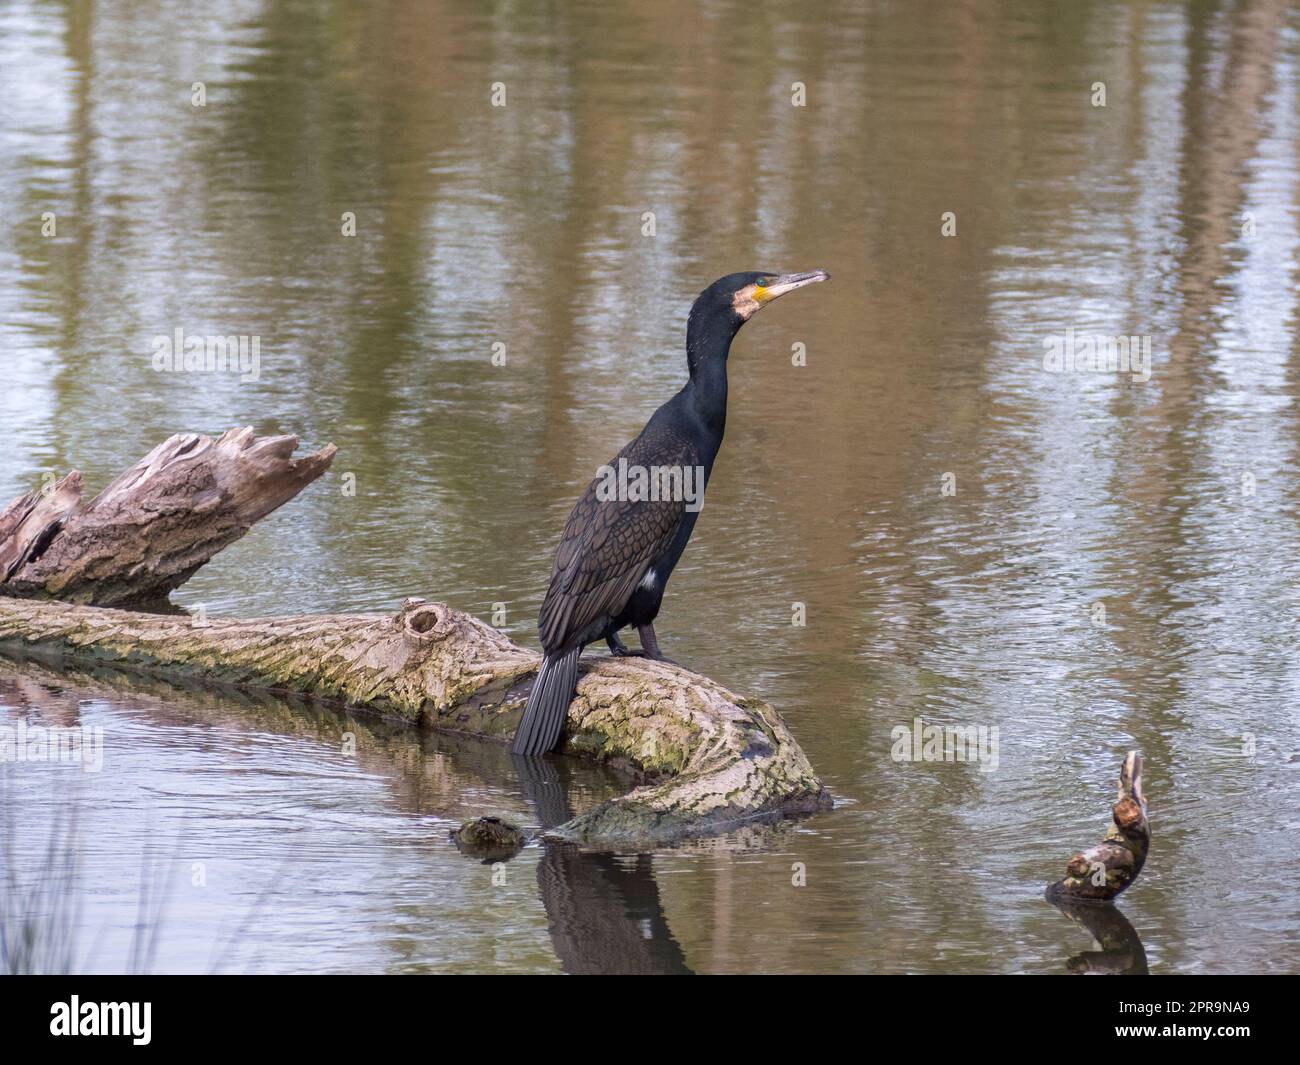 A Great Cormorant (Phalacrocorax carbo) sitting on a log on the River Thames near Henley-On-Thames, Oxfordshire, England. Stock Photo